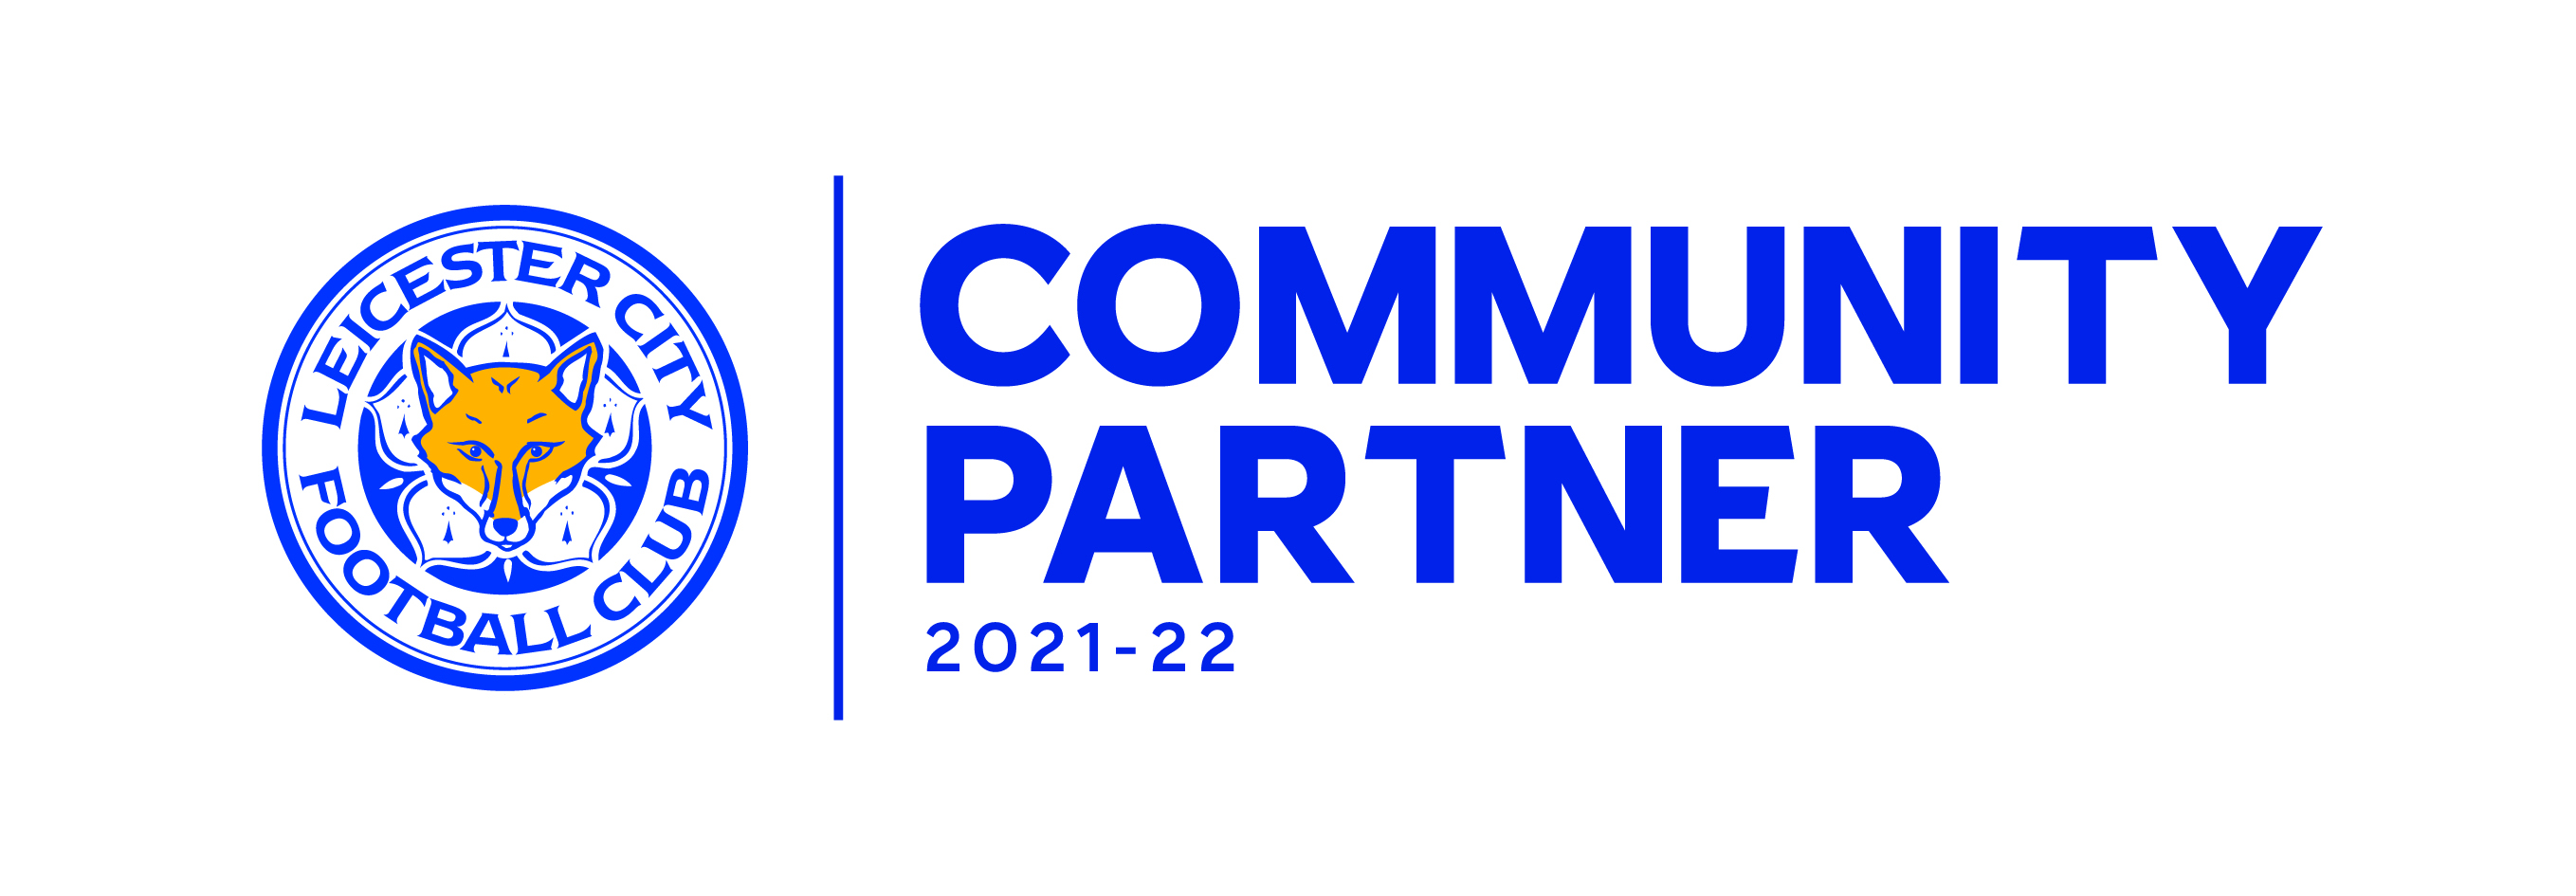 2XL Commercial Become Official Community Partner at Leicester City Football Club!